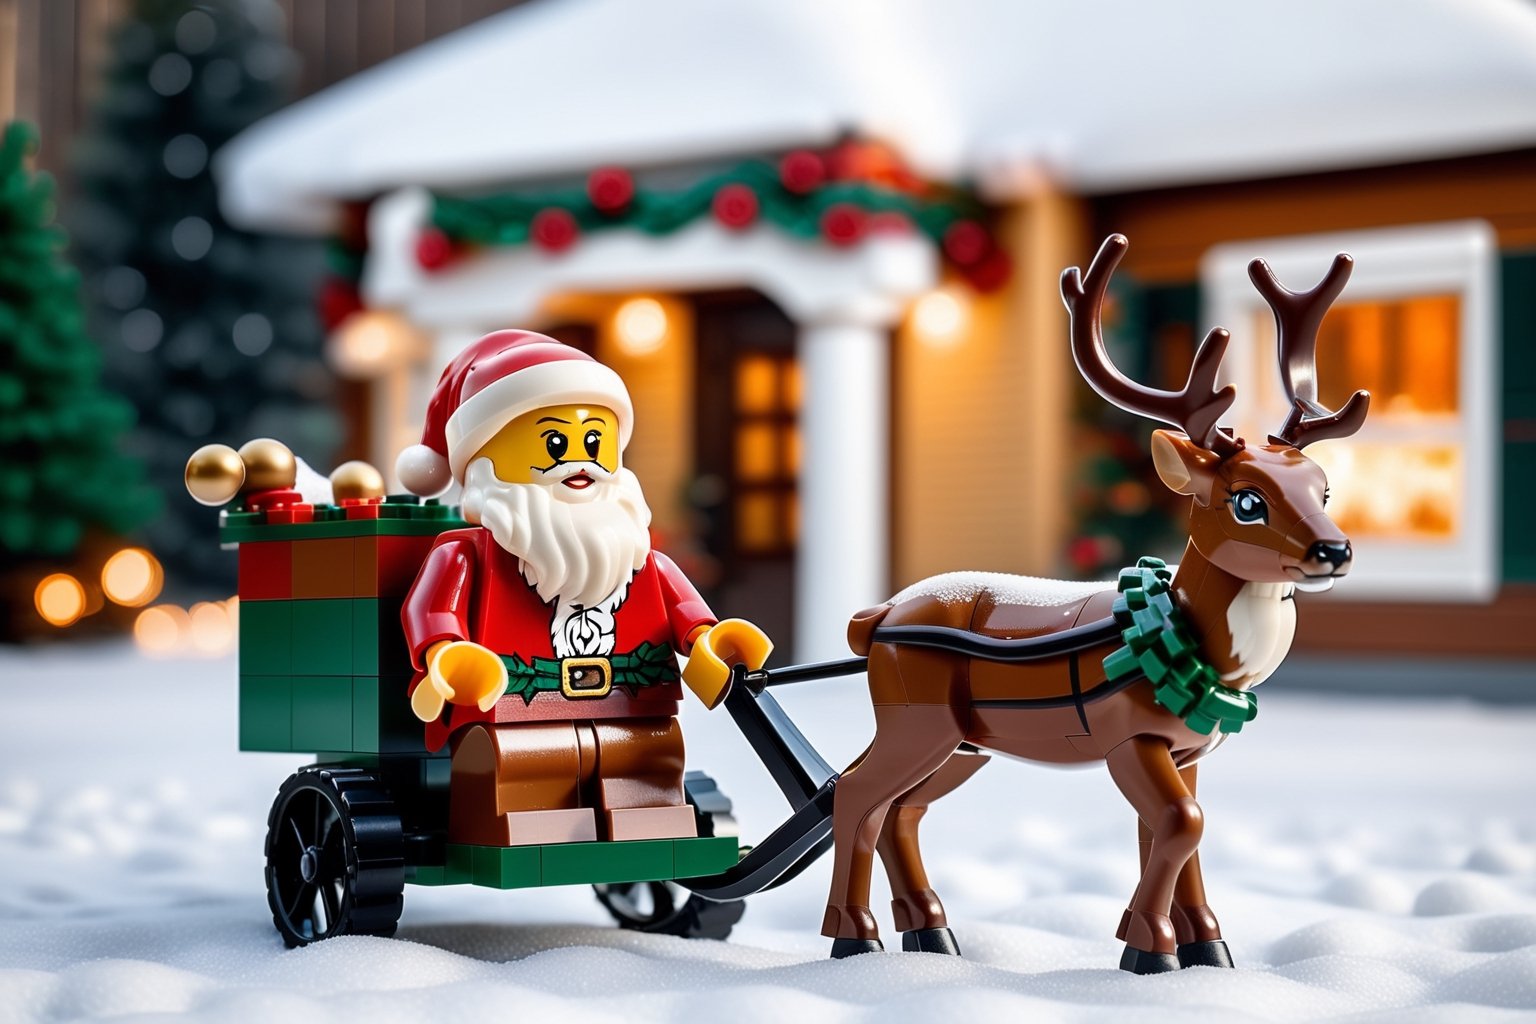 Lego themed,  outdoor,  snowing,  in front of house,  a Santa claus is sitting on a cart connected with deer,  (Warm and bright color tones),  (Soft diffuse lighting),  masterpiece,  best quality,  detailmaster2,ral-chrcrts,christmas